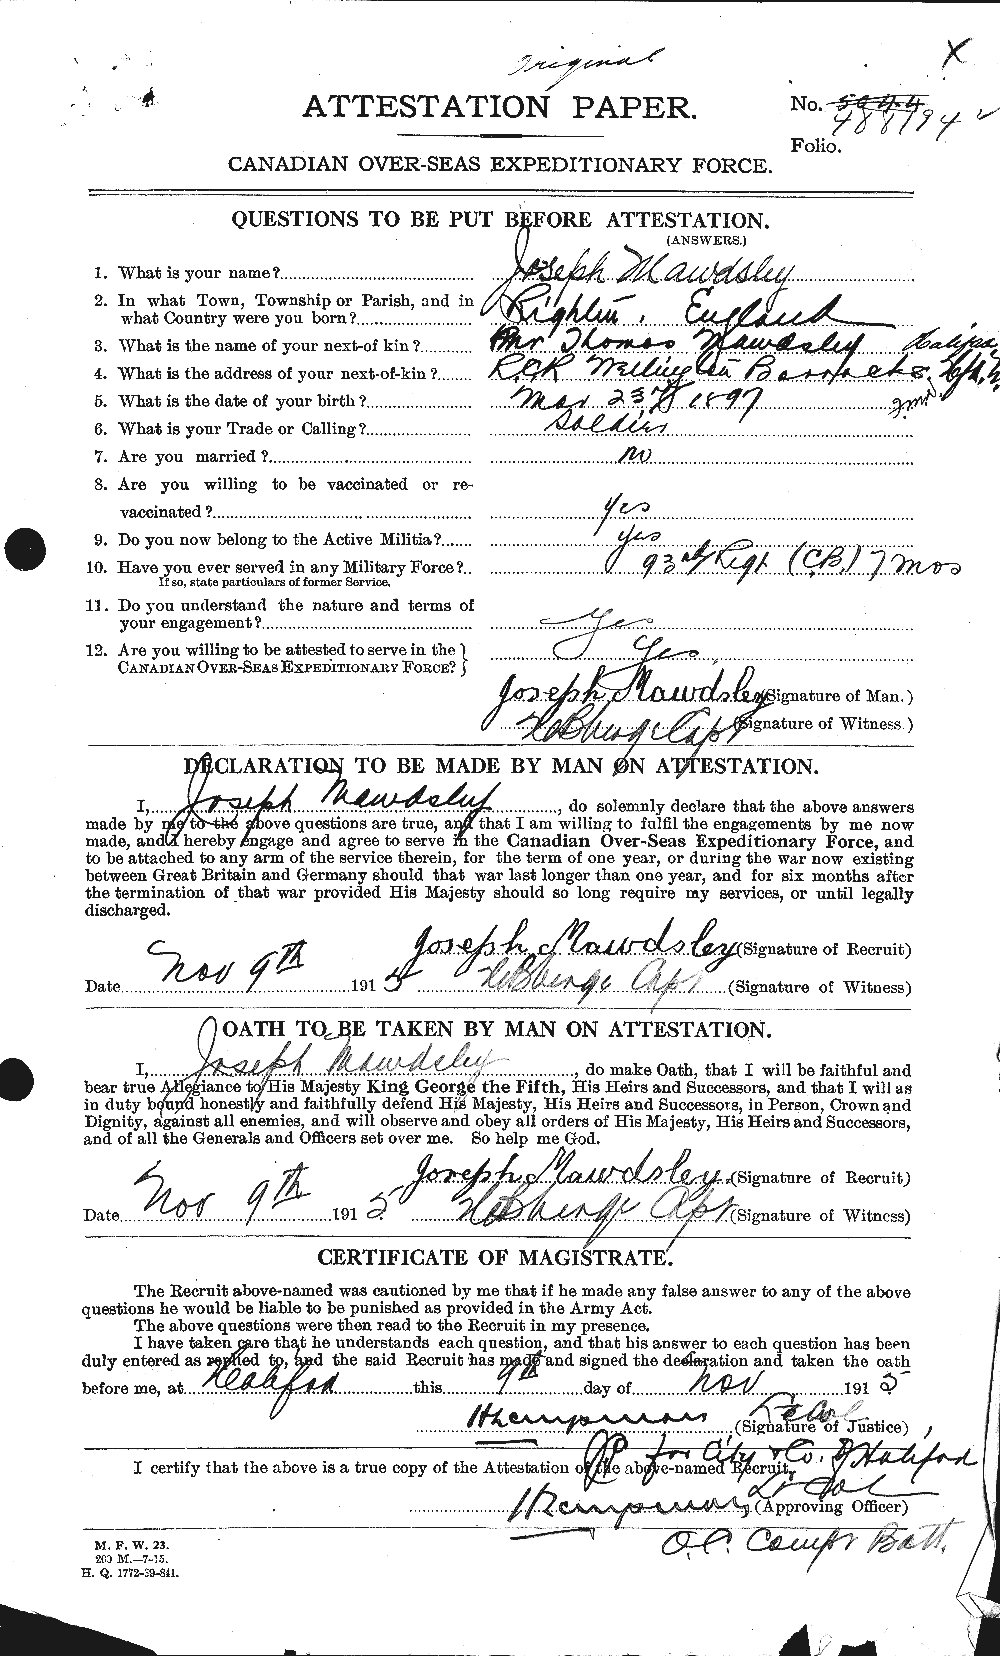 Personnel Records of the First World War - CEF 487956a